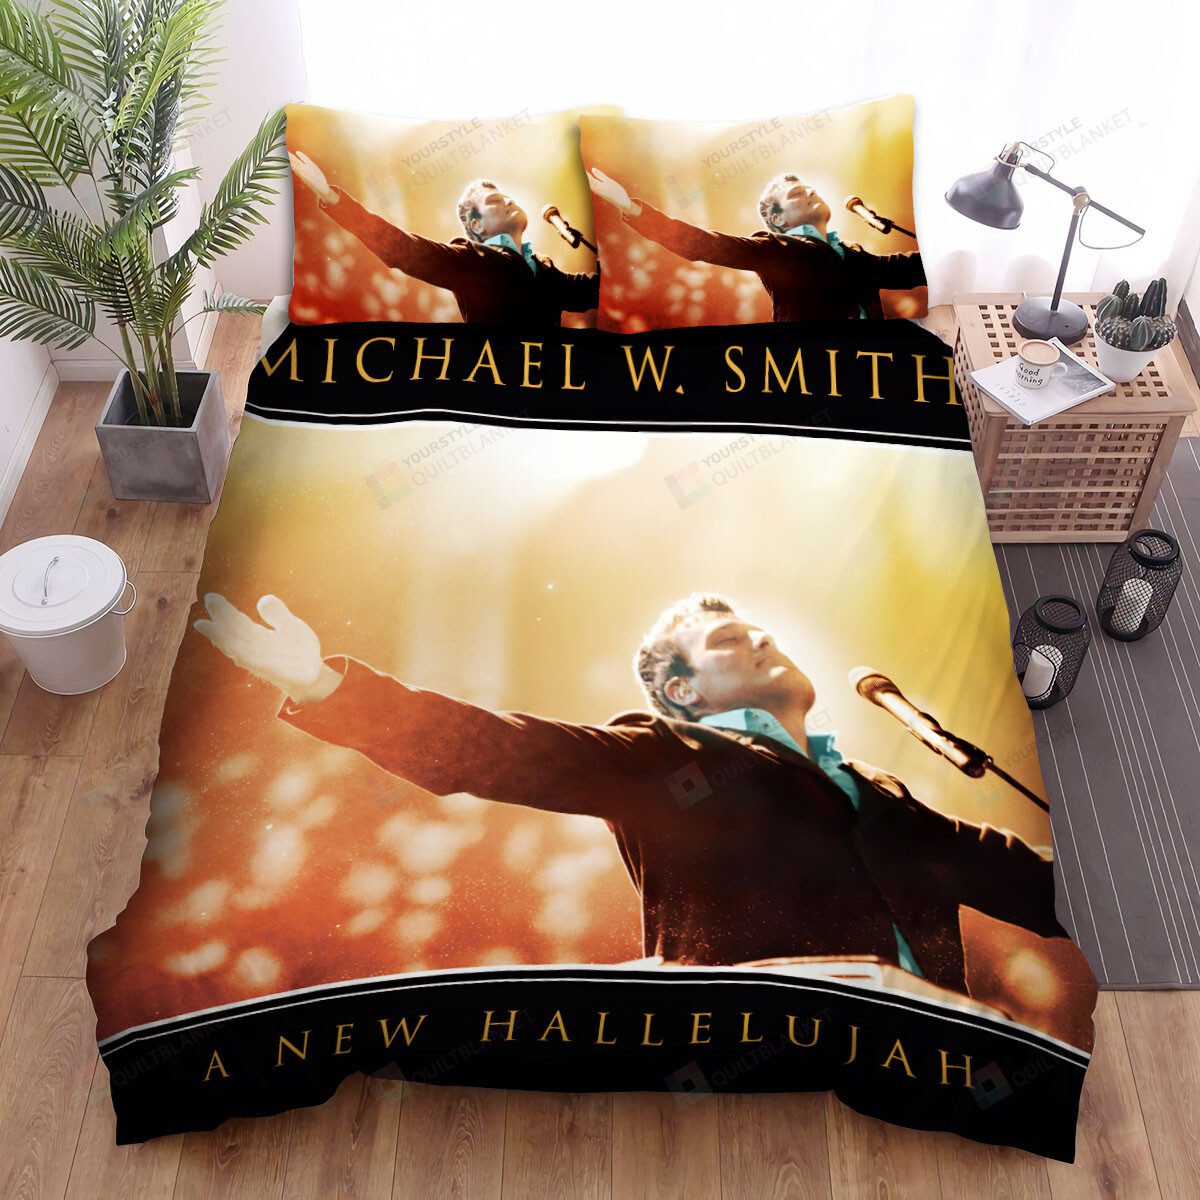 Michael W. Smith A New Hallelujah Bed Sheets Spread Comforter Duvet Cover Bedding Sets